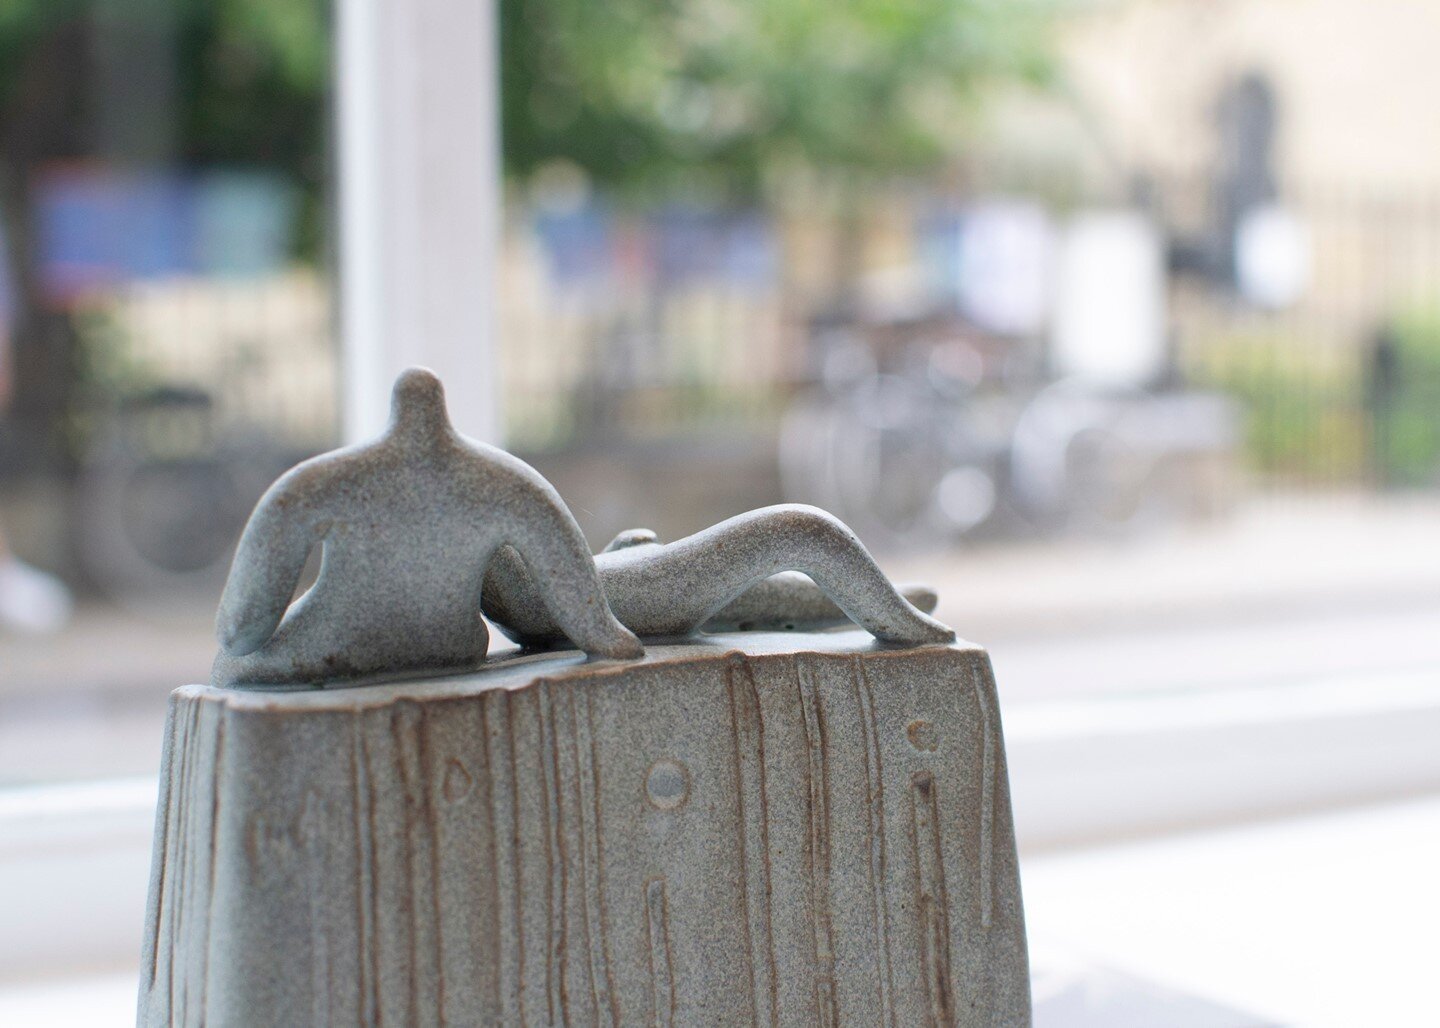 Cat Santos sculptures looking out of our front window 😍 Cat's work is so eye-catching and a great talking point for many passers by!⁠
⁠
Shop online or in the gallery:⁠
www.cambridgecrafts.co.uk/cat-santos⁠
@catsantosceramics⁠
⁠
⁠
⁠
#cambridge #lovec